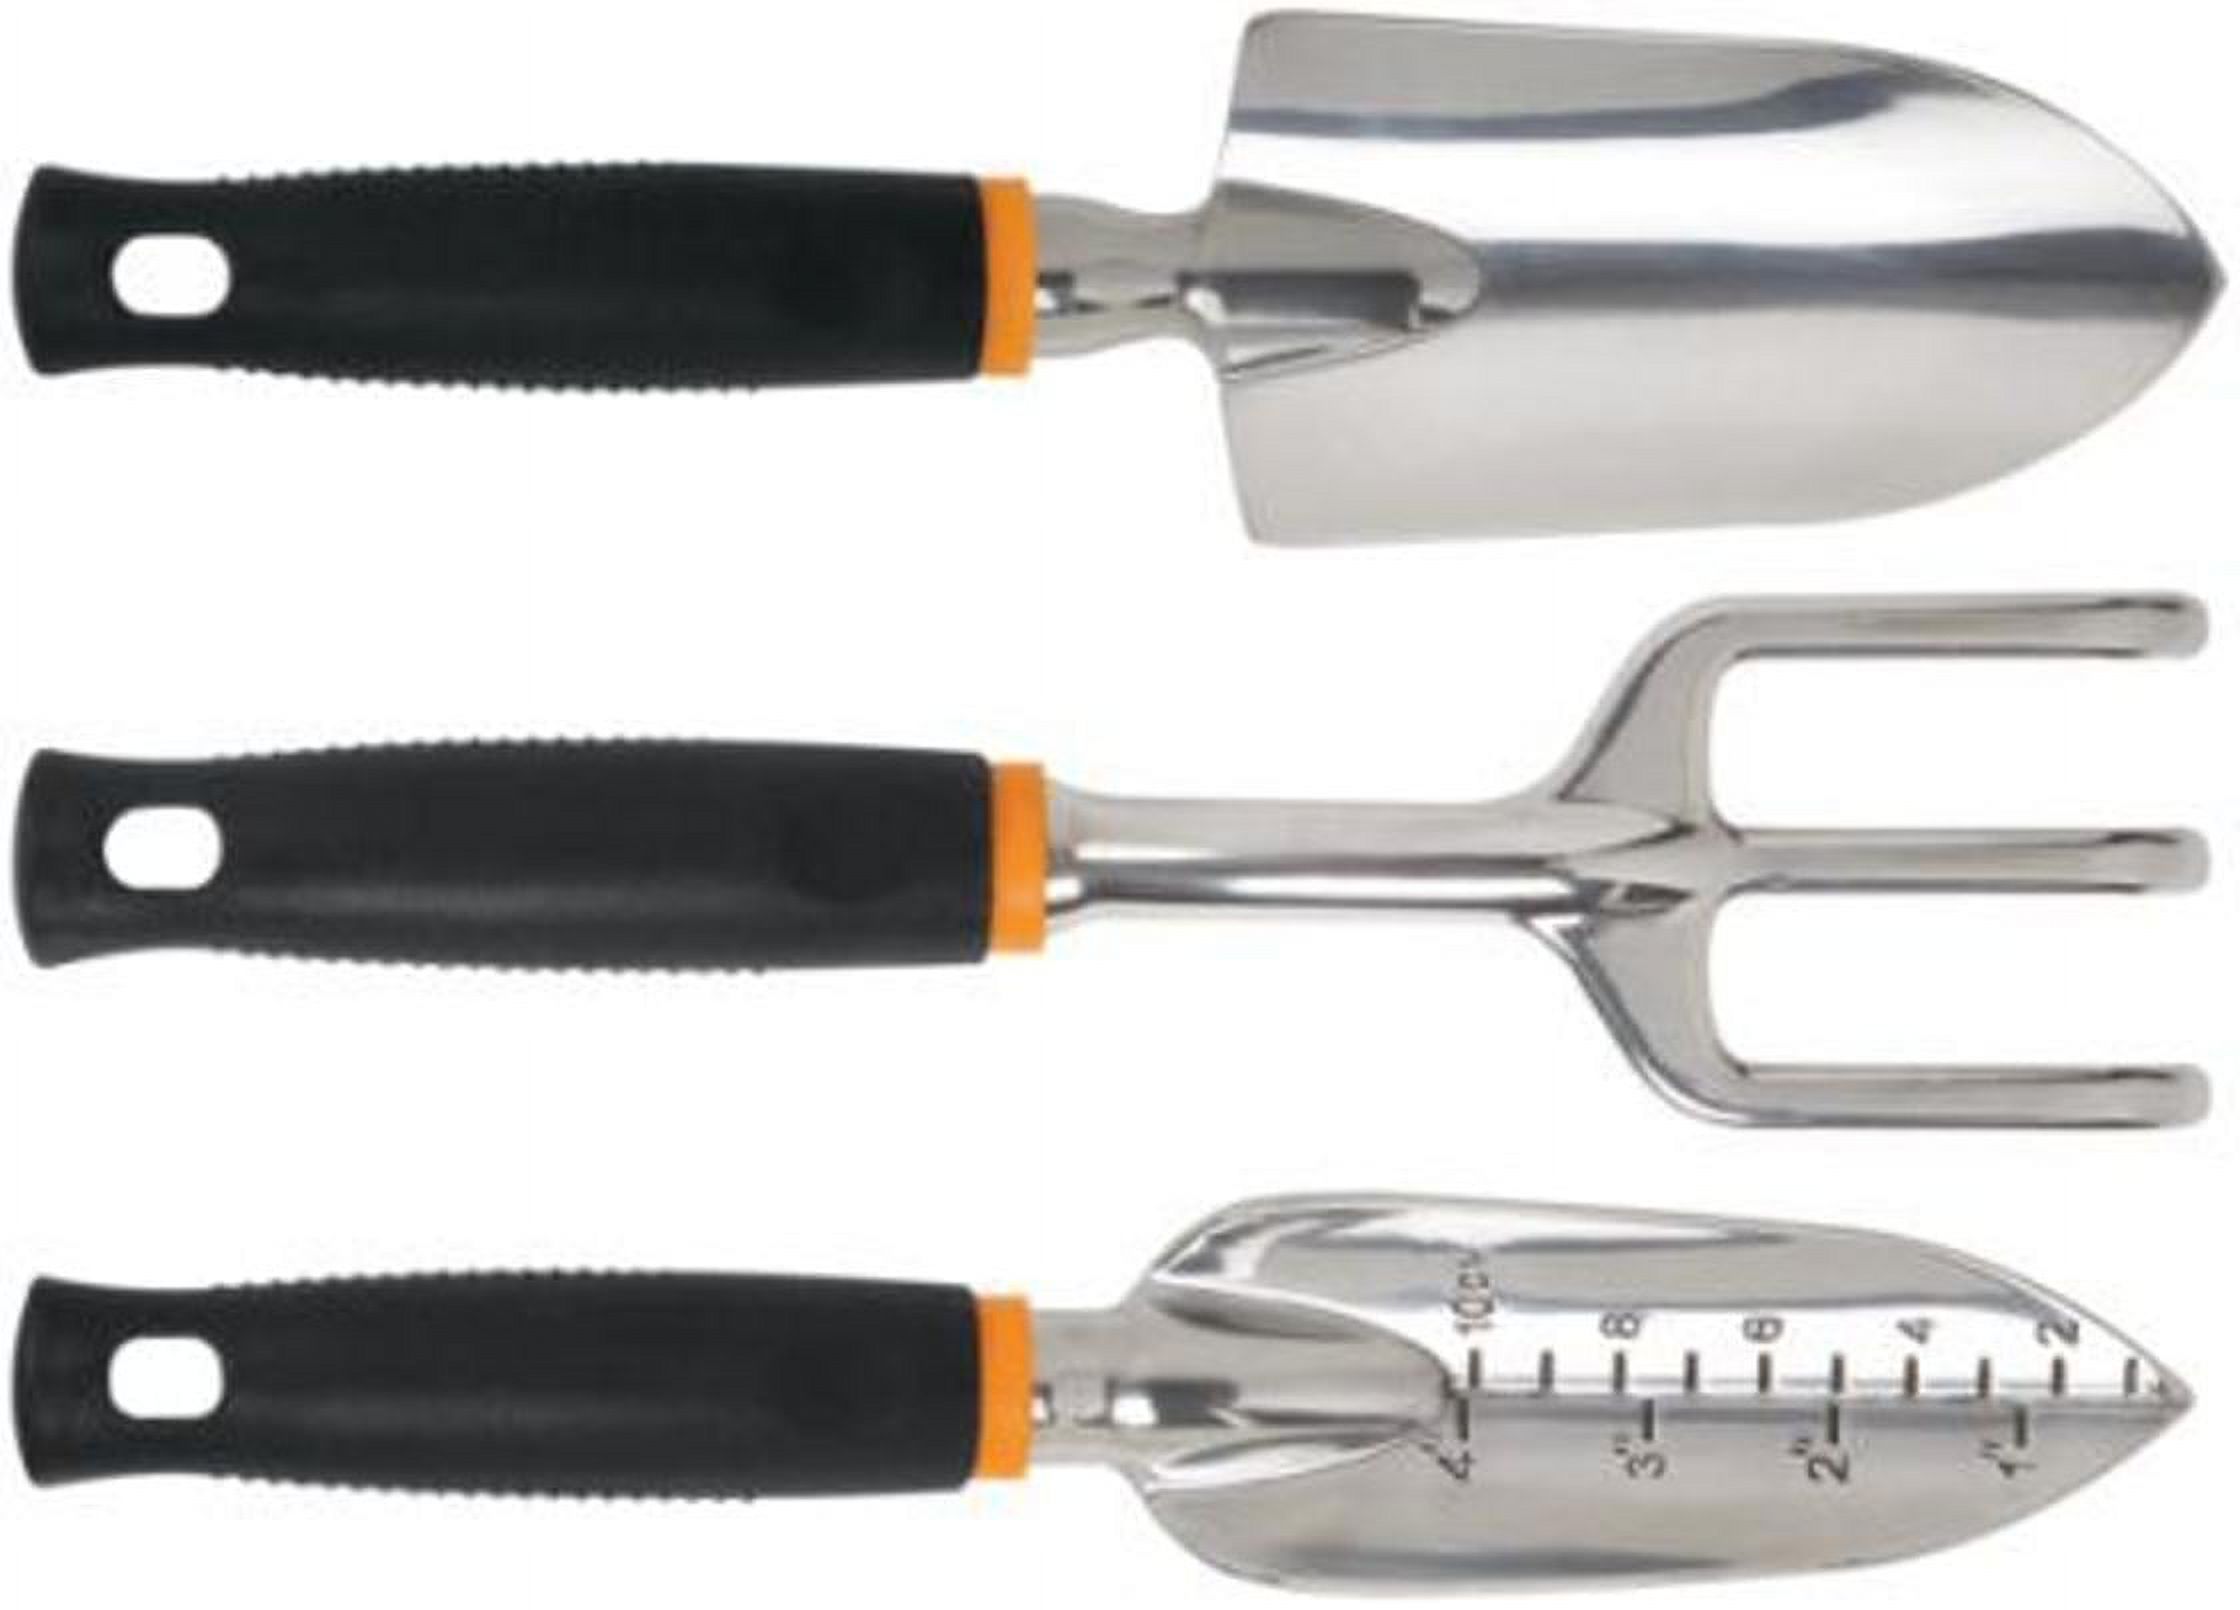 Fiskars Softouch Cultivating 3-piece set - image 1 of 4